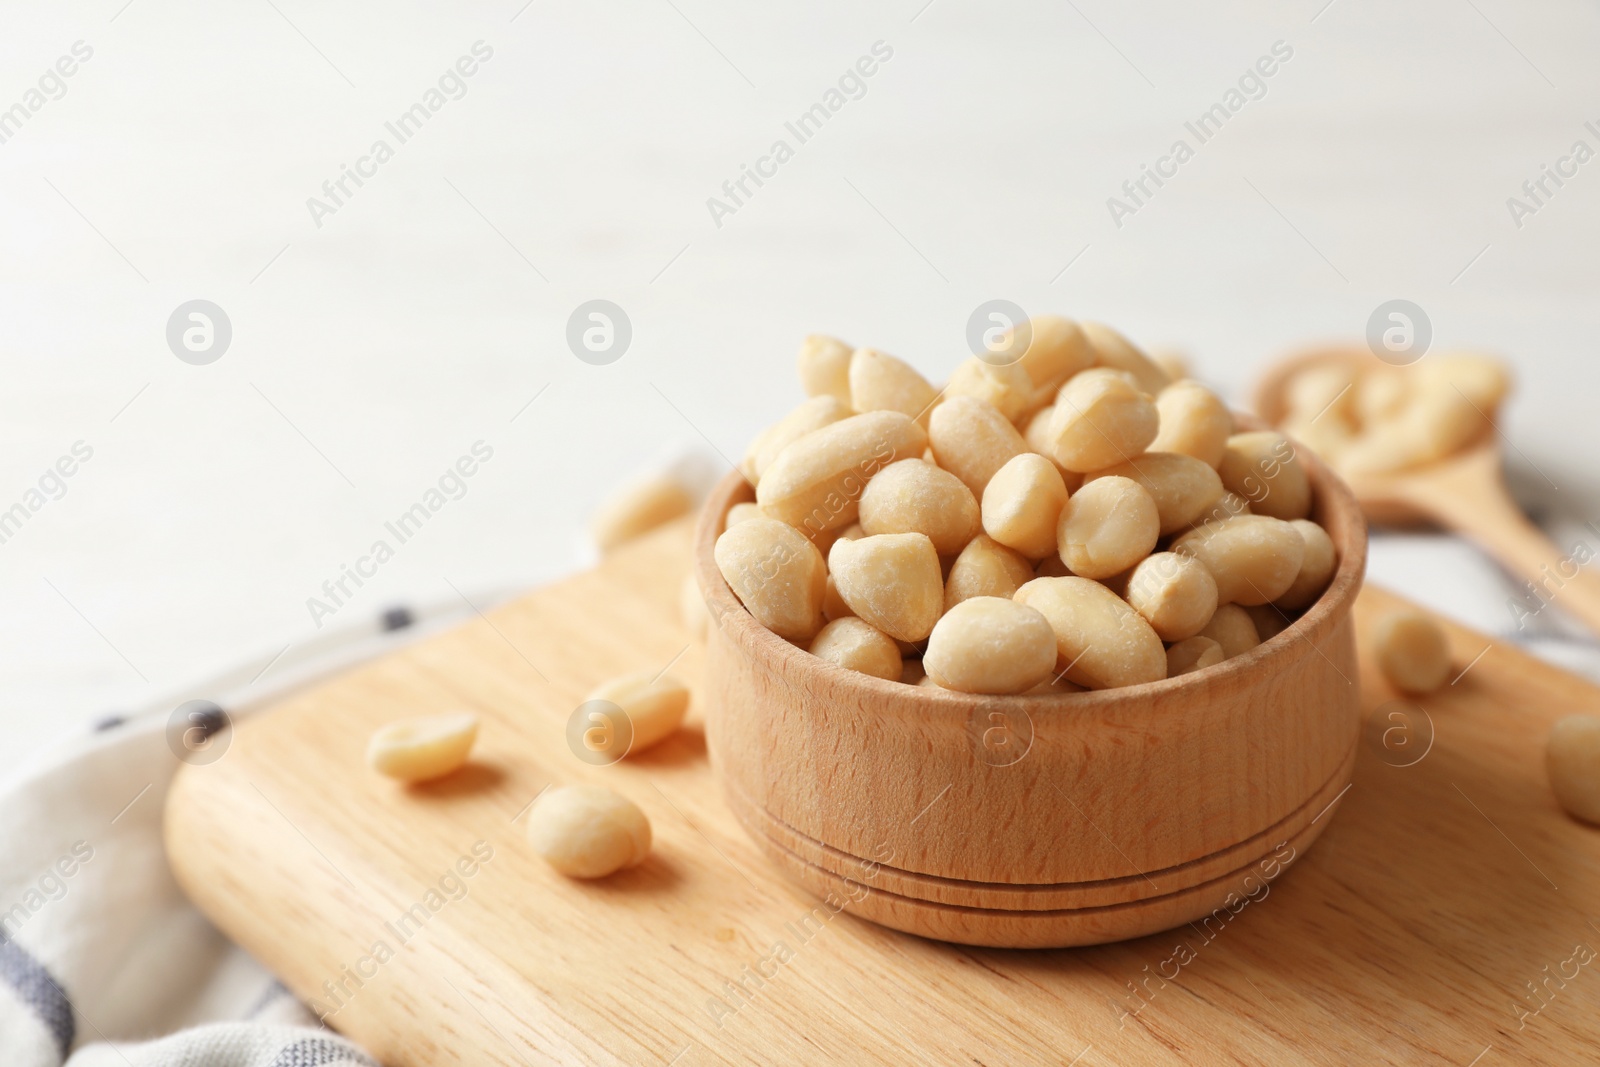 Photo of Shelled peanuts in wooden bowl on board